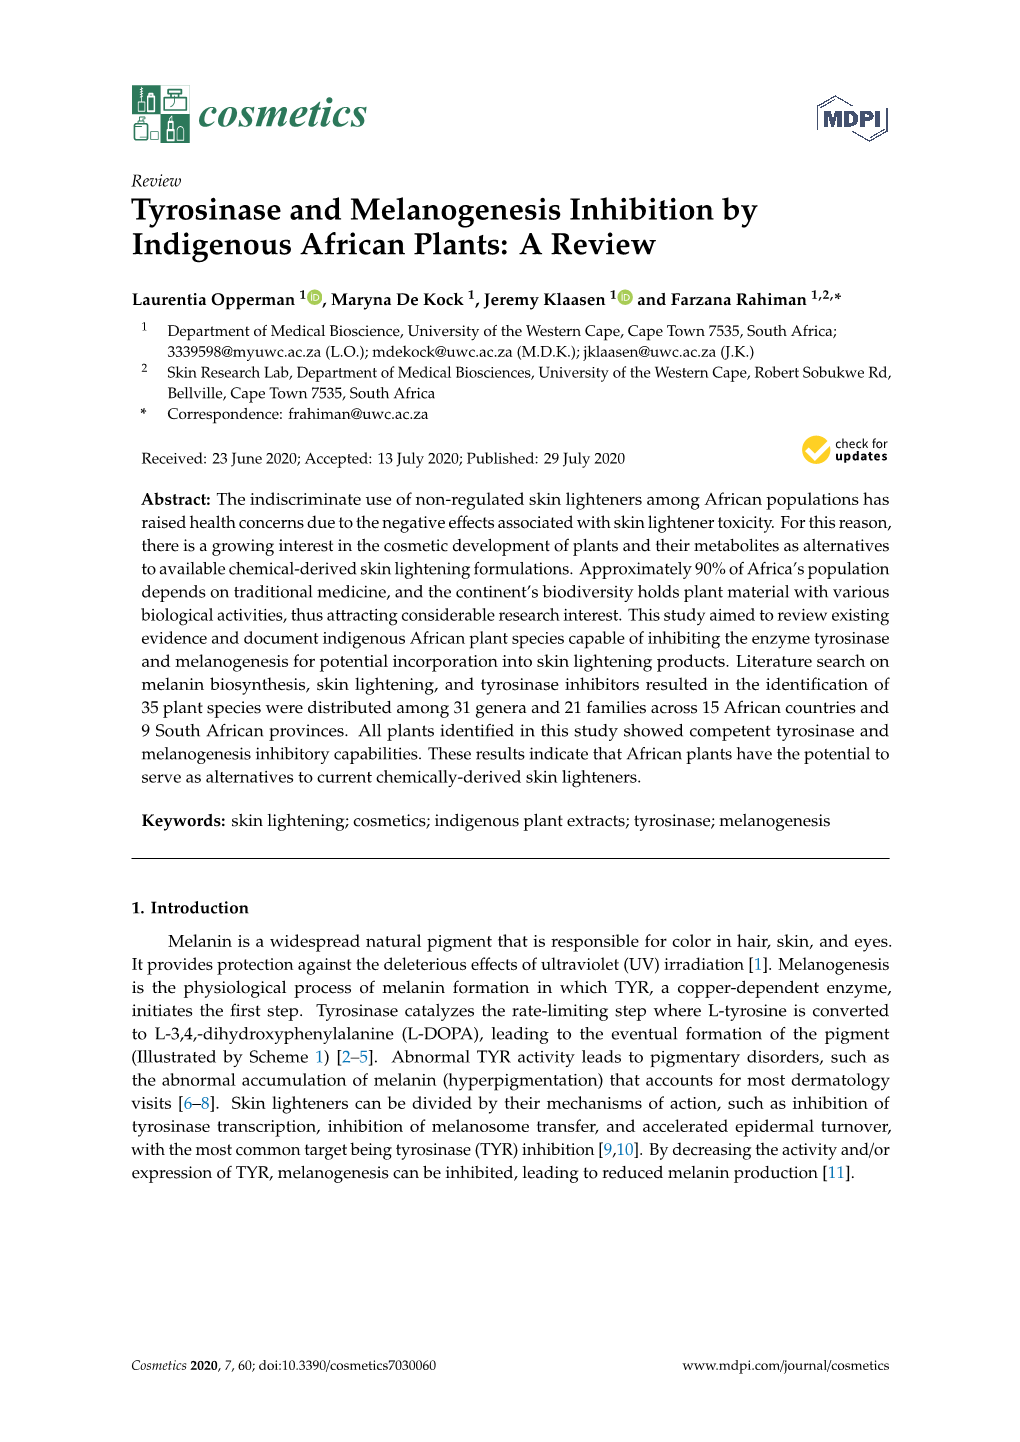 Tyrosinase and Melanogenesis Inhibition by Indigenous African Plants: a Review